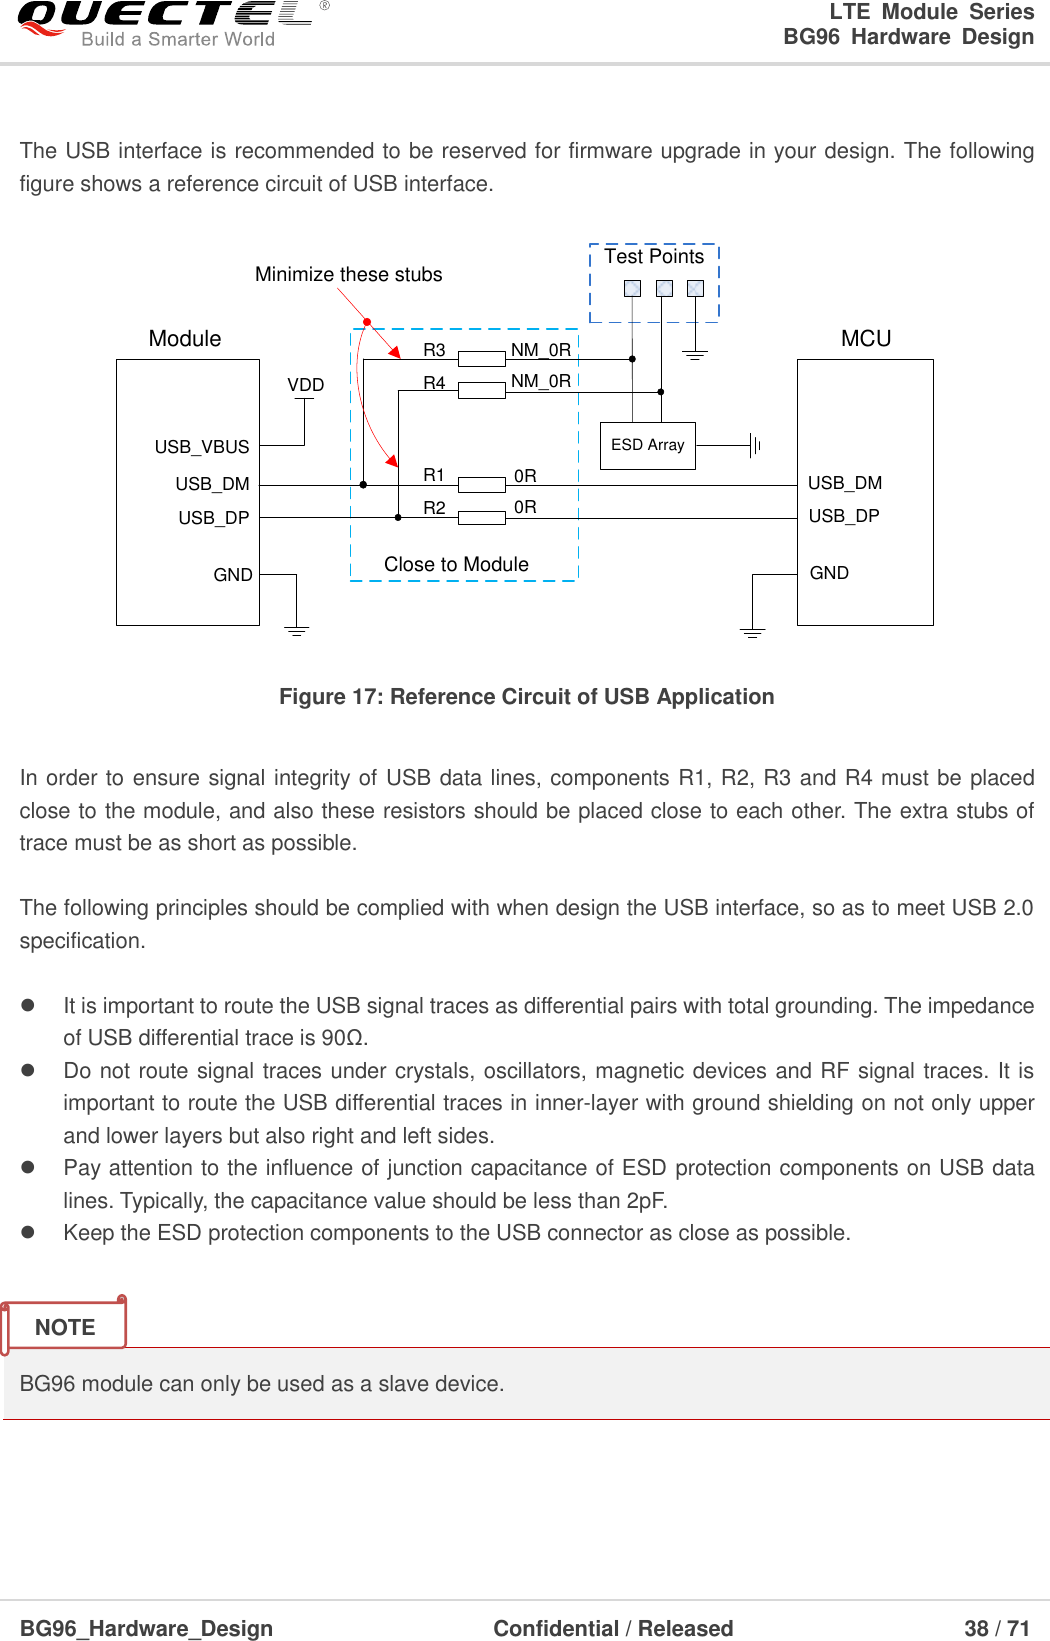 LTE  Module  Series                                                  BG96  Hardware  Design  BG96_Hardware_Design                              Confidential / Released                             38 / 71     The USB interface is recommended to be reserved for firmware upgrade in your design. The following figure shows a reference circuit of USB interface. USB_DPUSB_DMGNDUSB_DPUSB_DMGNDR1R2Close to ModuleR3R4Test PointsESD ArrayNM_0RNM_0R0R0RMinimize these stubsModule MCUUSB_VBUSVDD Figure 17: Reference Circuit of USB Application  In order to ensure signal integrity of USB data lines, components R1, R2, R3 and R4 must be placed close to the module, and also these resistors should be placed close to each other. The extra stubs of trace must be as short as possible.  The following principles should be complied with when design the USB interface, so as to meet USB 2.0 specification.      It is important to route the USB signal traces as differential pairs with total grounding. The impedance of USB differential trace is 90Ω.   Do not route signal traces under crystals, oscillators, magnetic devices and RF signal traces. It is important to route the USB differential traces in inner-layer with ground shielding on not only upper and lower layers but also right and left sides.   Pay attention to the influence of junction capacitance of ESD protection components on USB data lines. Typically, the capacitance value should be less than 2pF.   Keep the ESD protection components to the USB connector as close as possible.   BG96 module can only be used as a slave device.   NOTE 